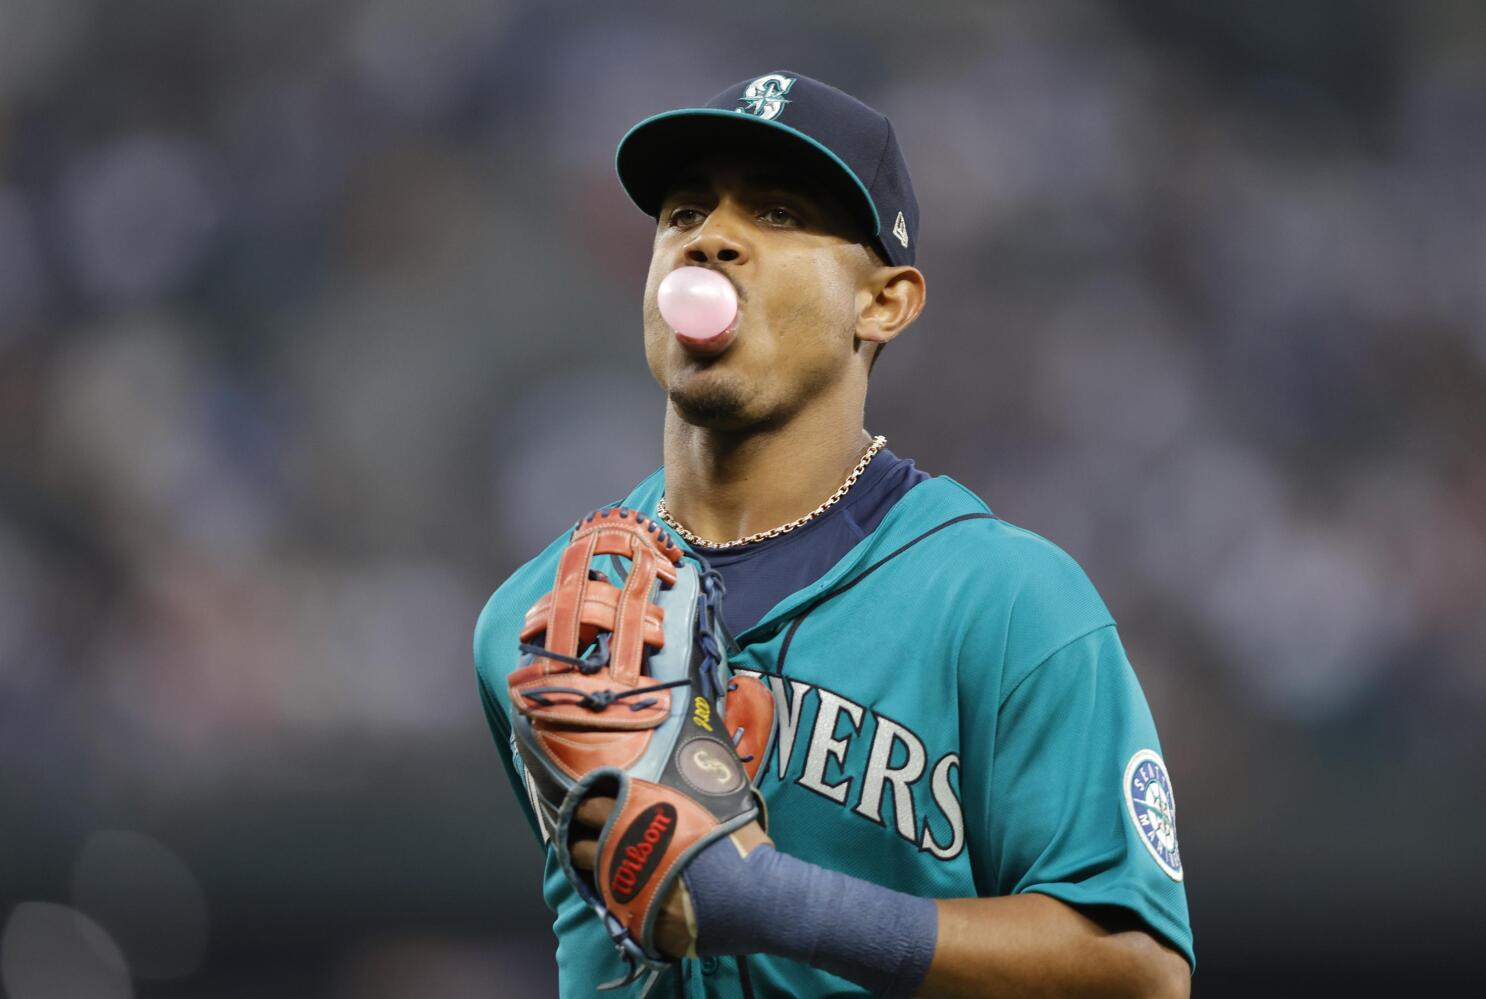 Mariners who could get contract extensions